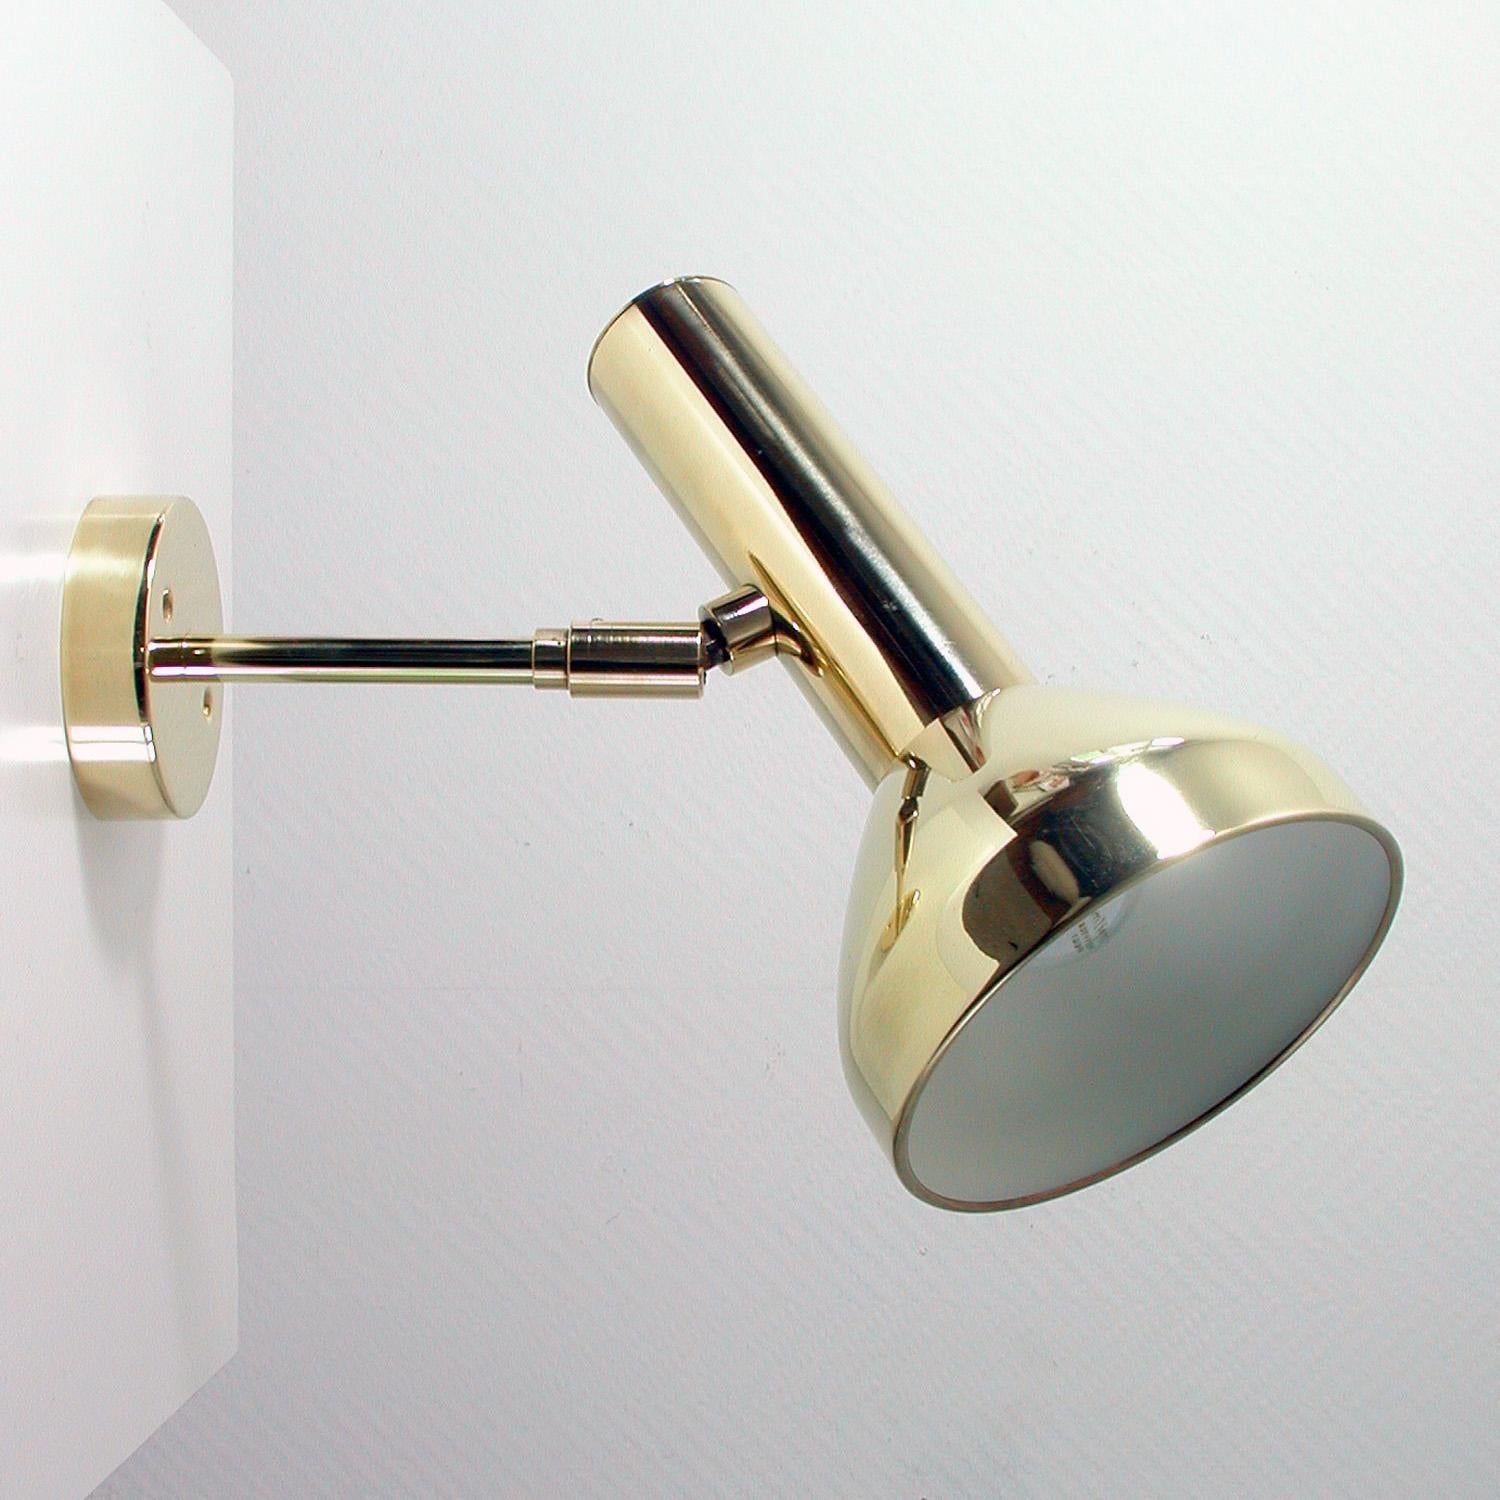 Mid-Century Modern Midcentury German Brass Wall Light Sconce by Cosack, 1960s For Sale